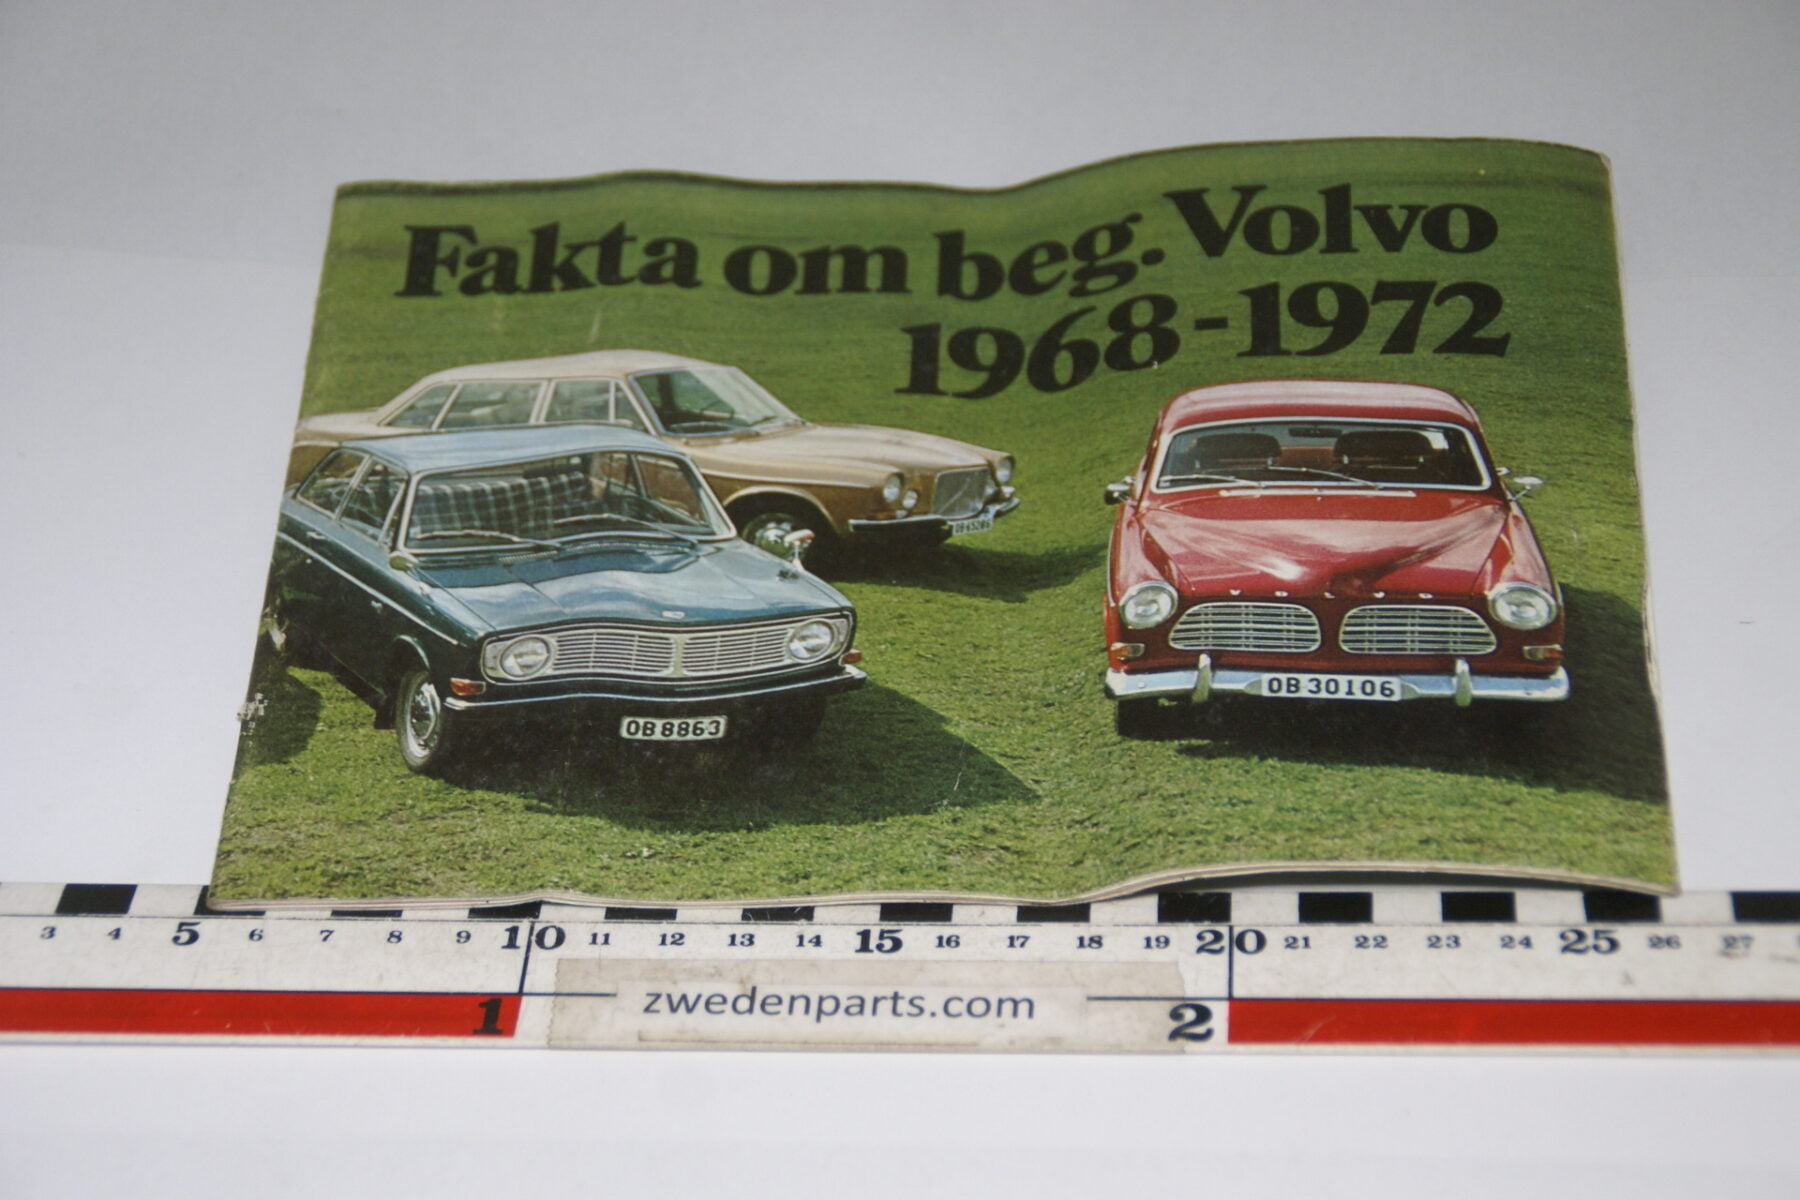 DSC06167 1973 brochure Facts about used Volvos, nr RSPPV 766, Svenska-9cfedf7c